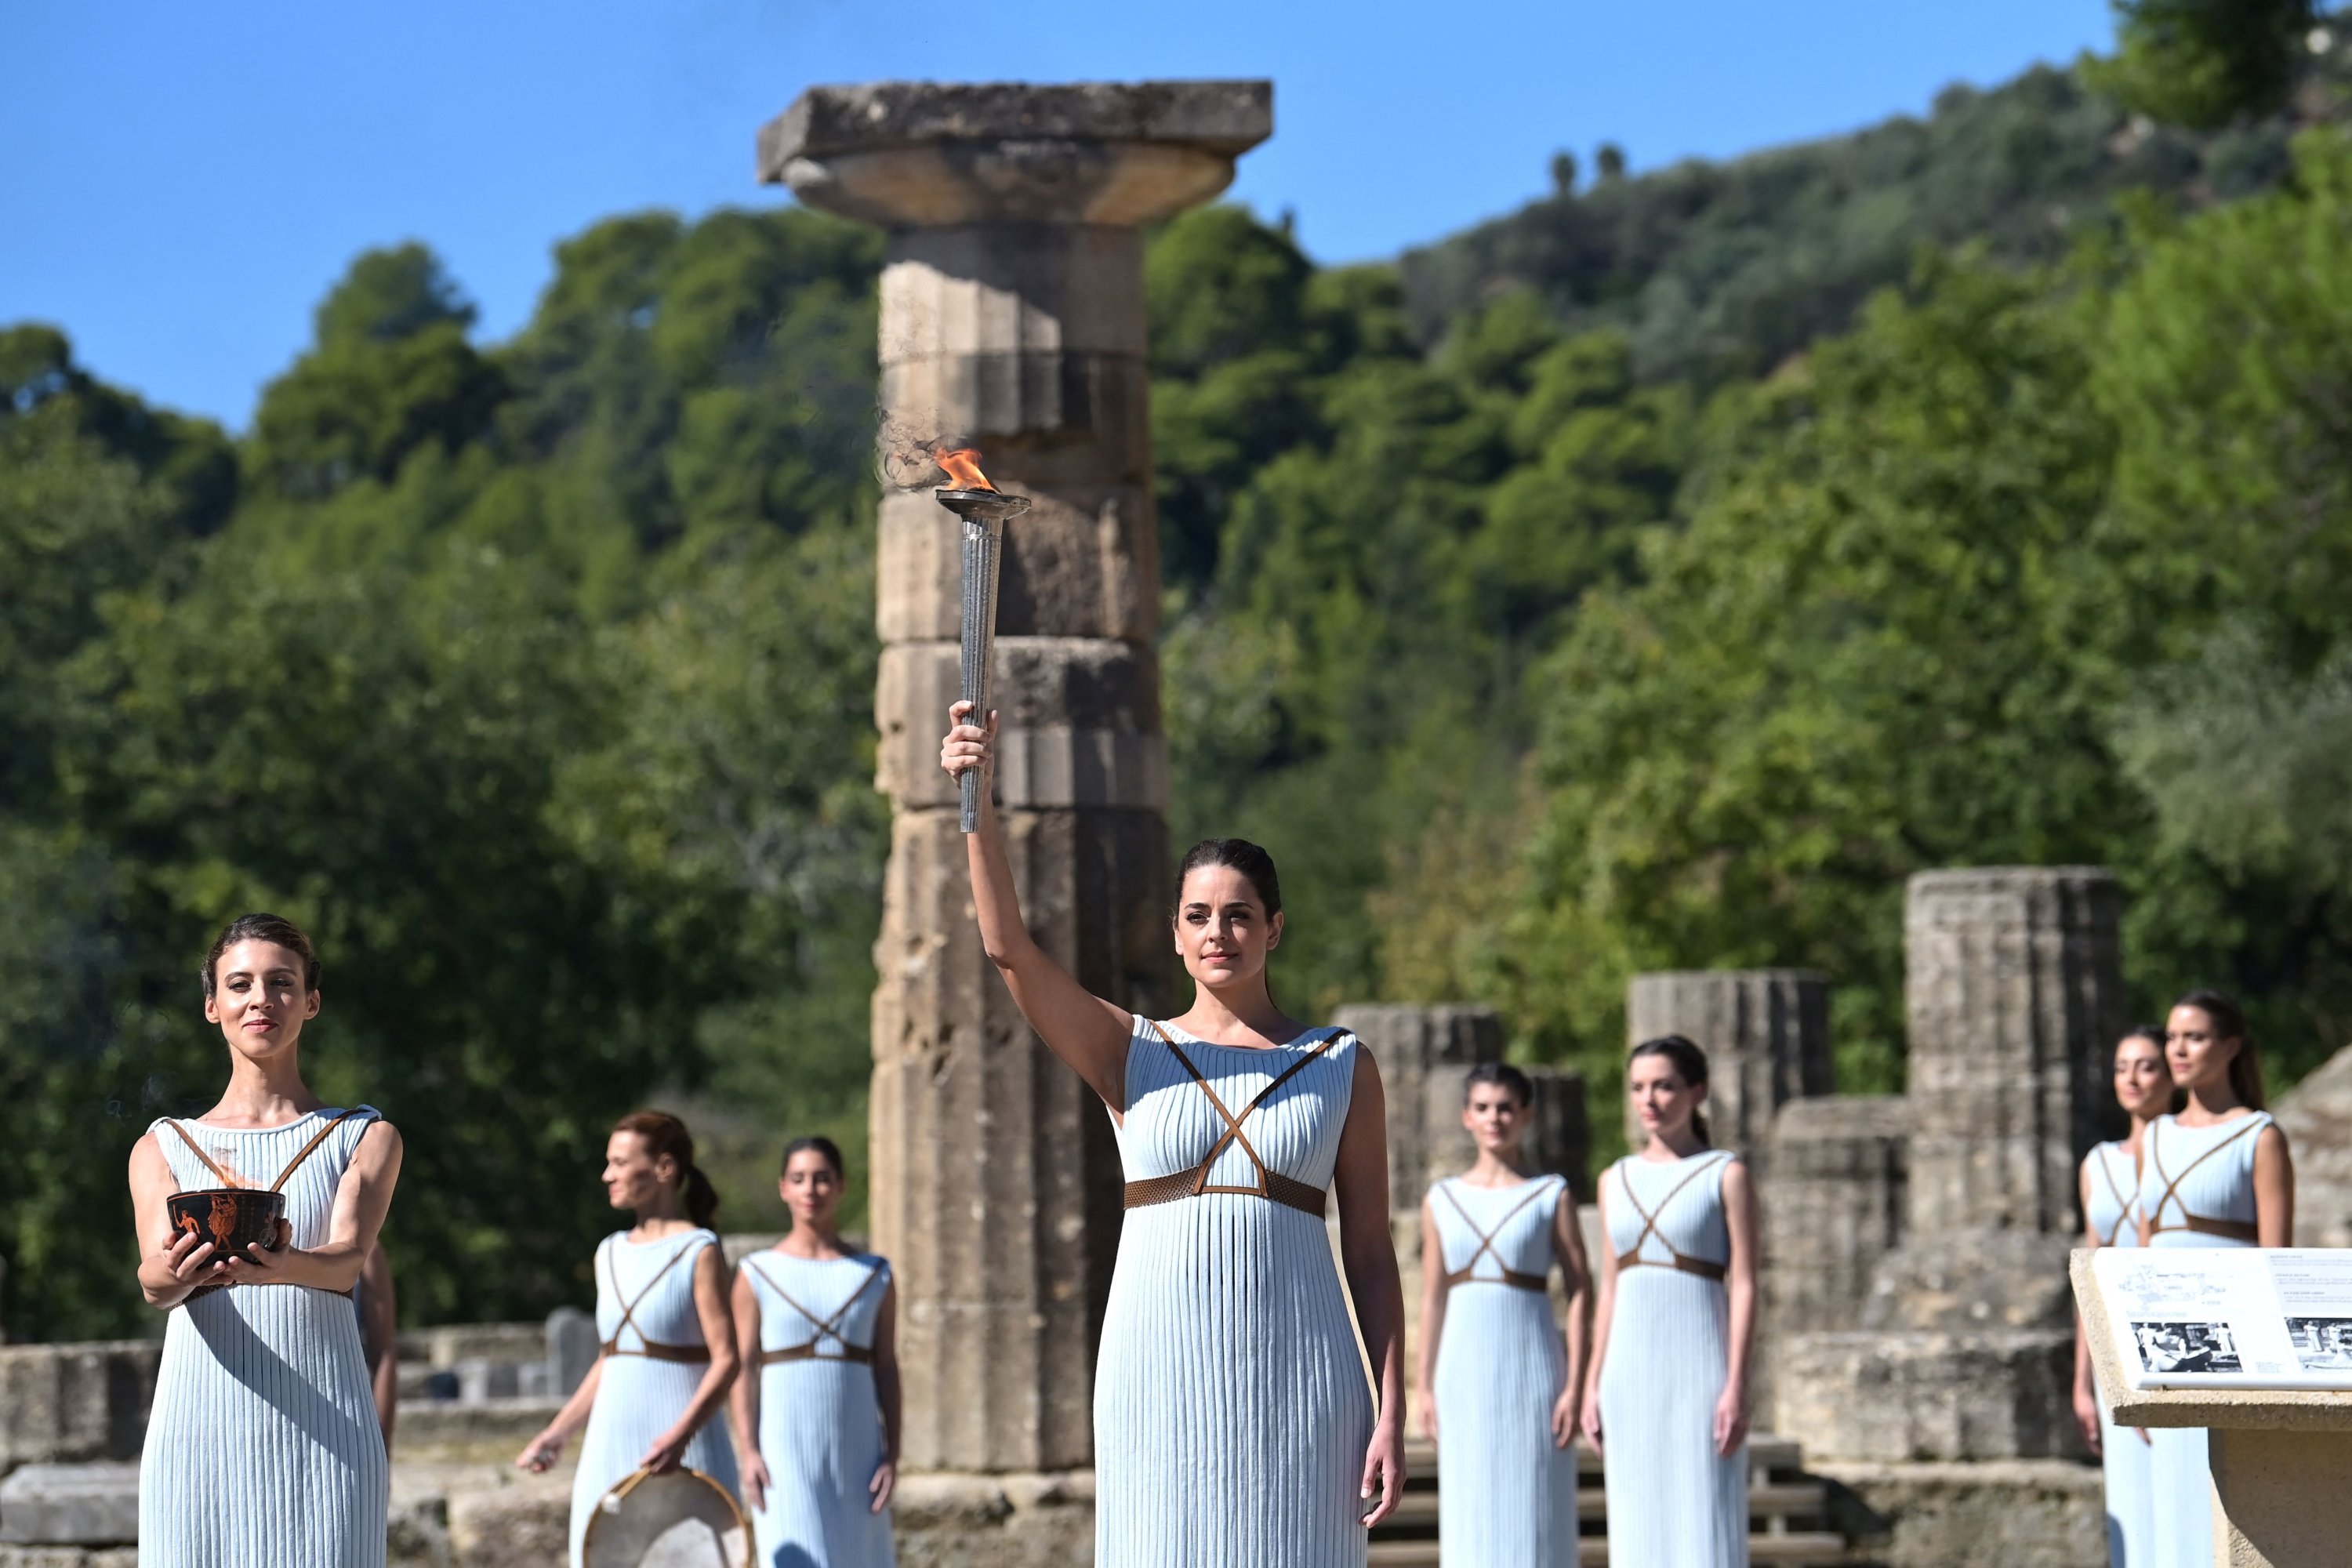 Greek actress Xanthi Georgiou (C), playing the role of the high priestess, holds up the lit torch during the flame lighting ceremony for the Beijing 2022 Winter Olympics at the Ancient Olympia archeological site, birthplace of the ancient Olympics in southern Greece, Oct. 18, 2021. (AFP Photo)